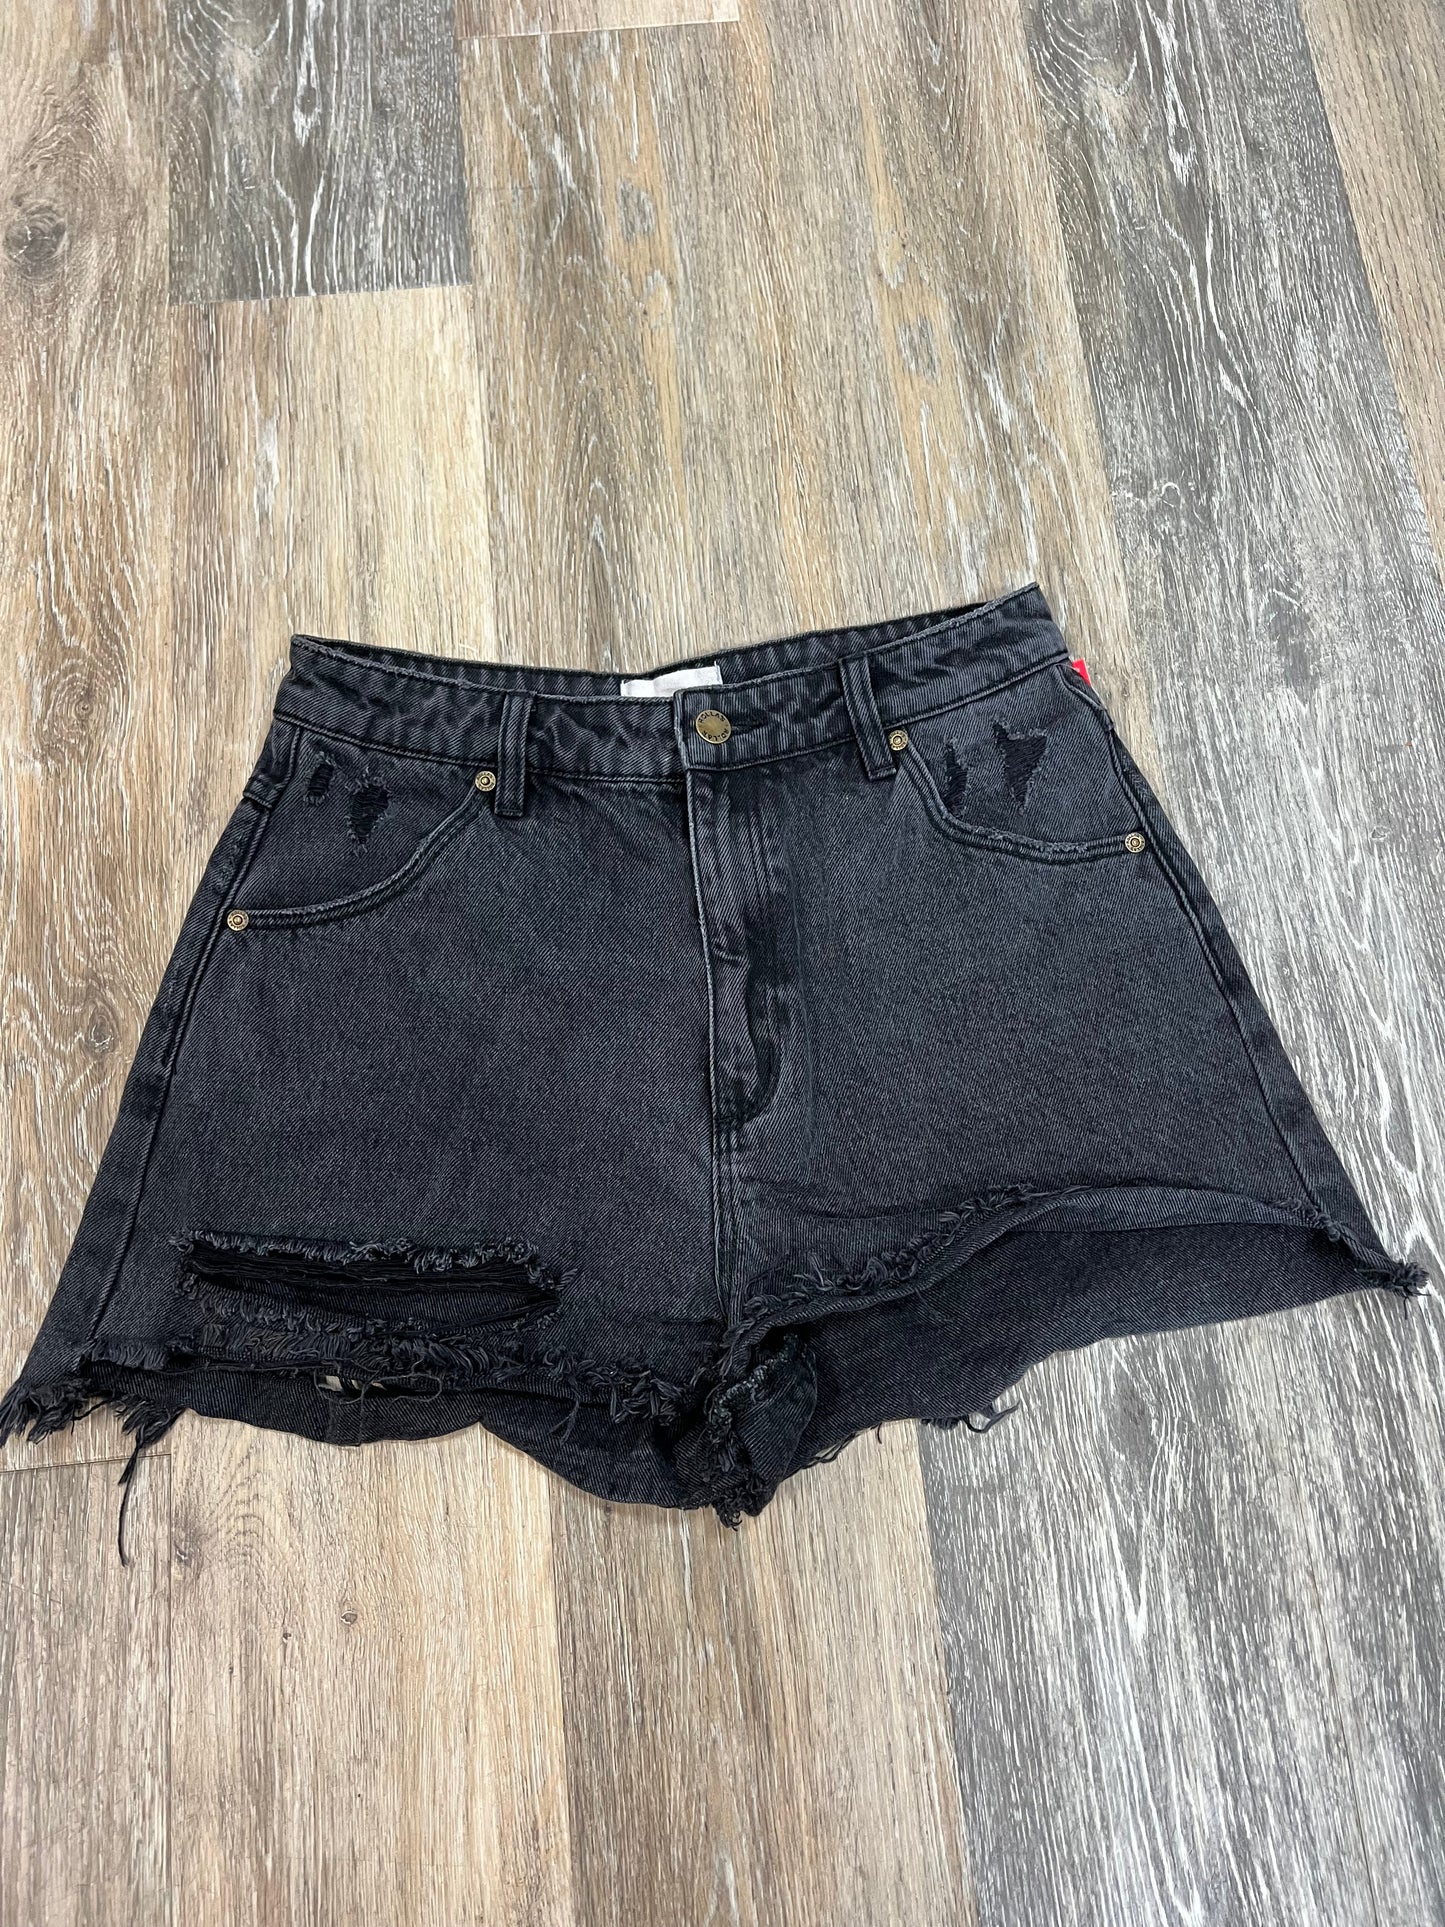 Shorts By Rollas  Size: 6/28